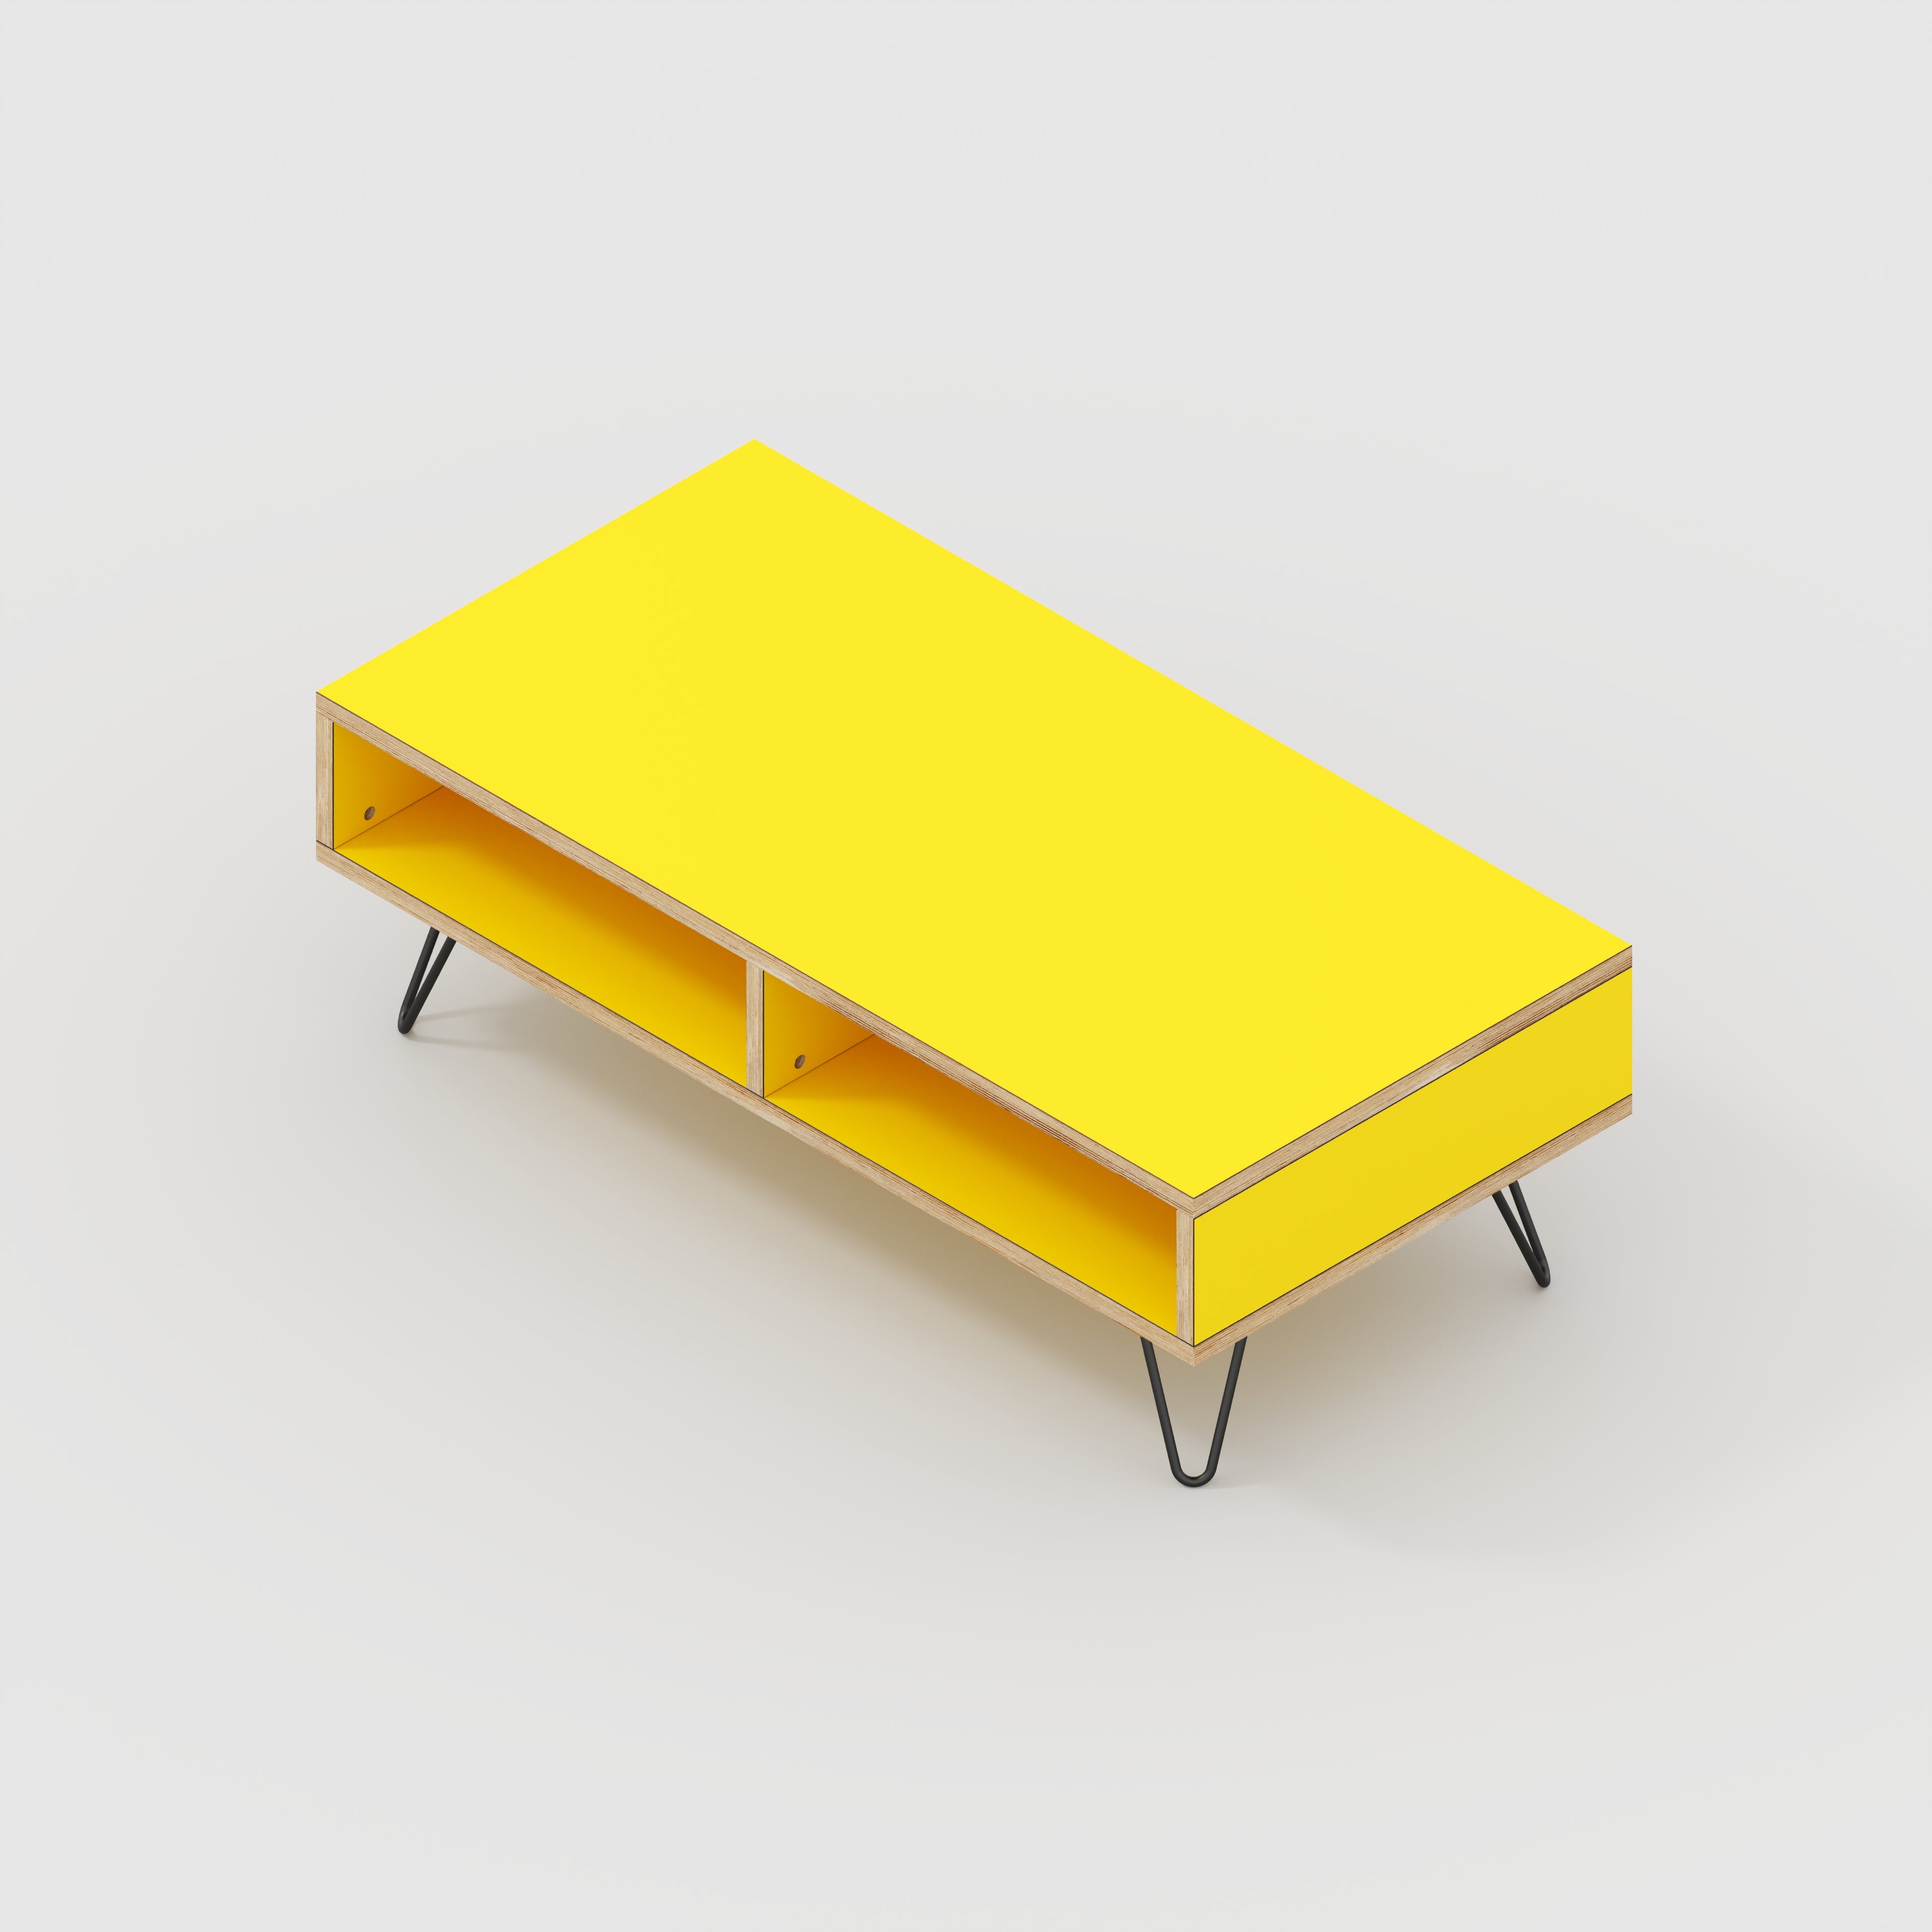 Coffee Table with Box Storage and Black Hairpin Legs - Formica Chrome Yellow - 1200(w) x 600(d) x 400(h)